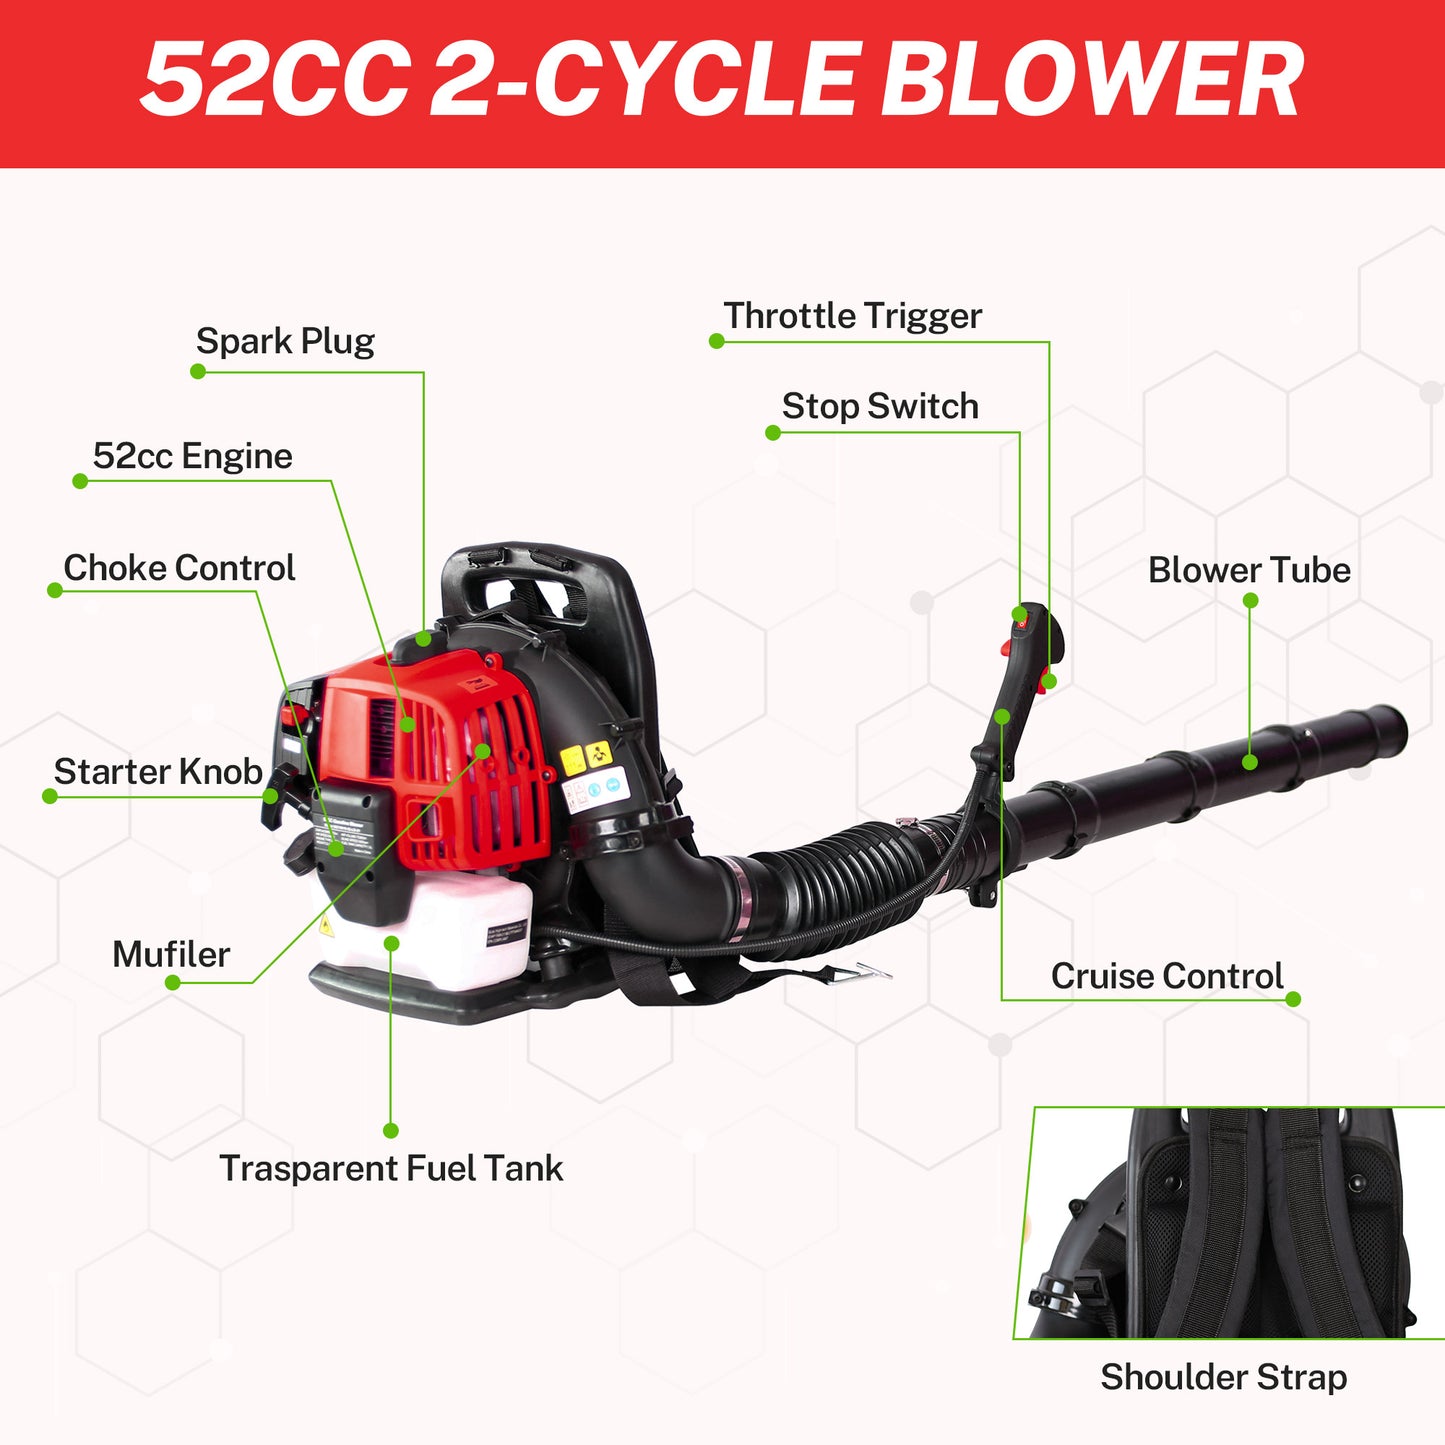 SYNGAR Gas Backpack Leaf Blower, 52CC 2-Cycle Leaf/Snow Blower with Extension Tube, for Dust Cleaning, Snow Blowing, Backyard, Garden, Work Around the House, Not for Sale in California, D7323